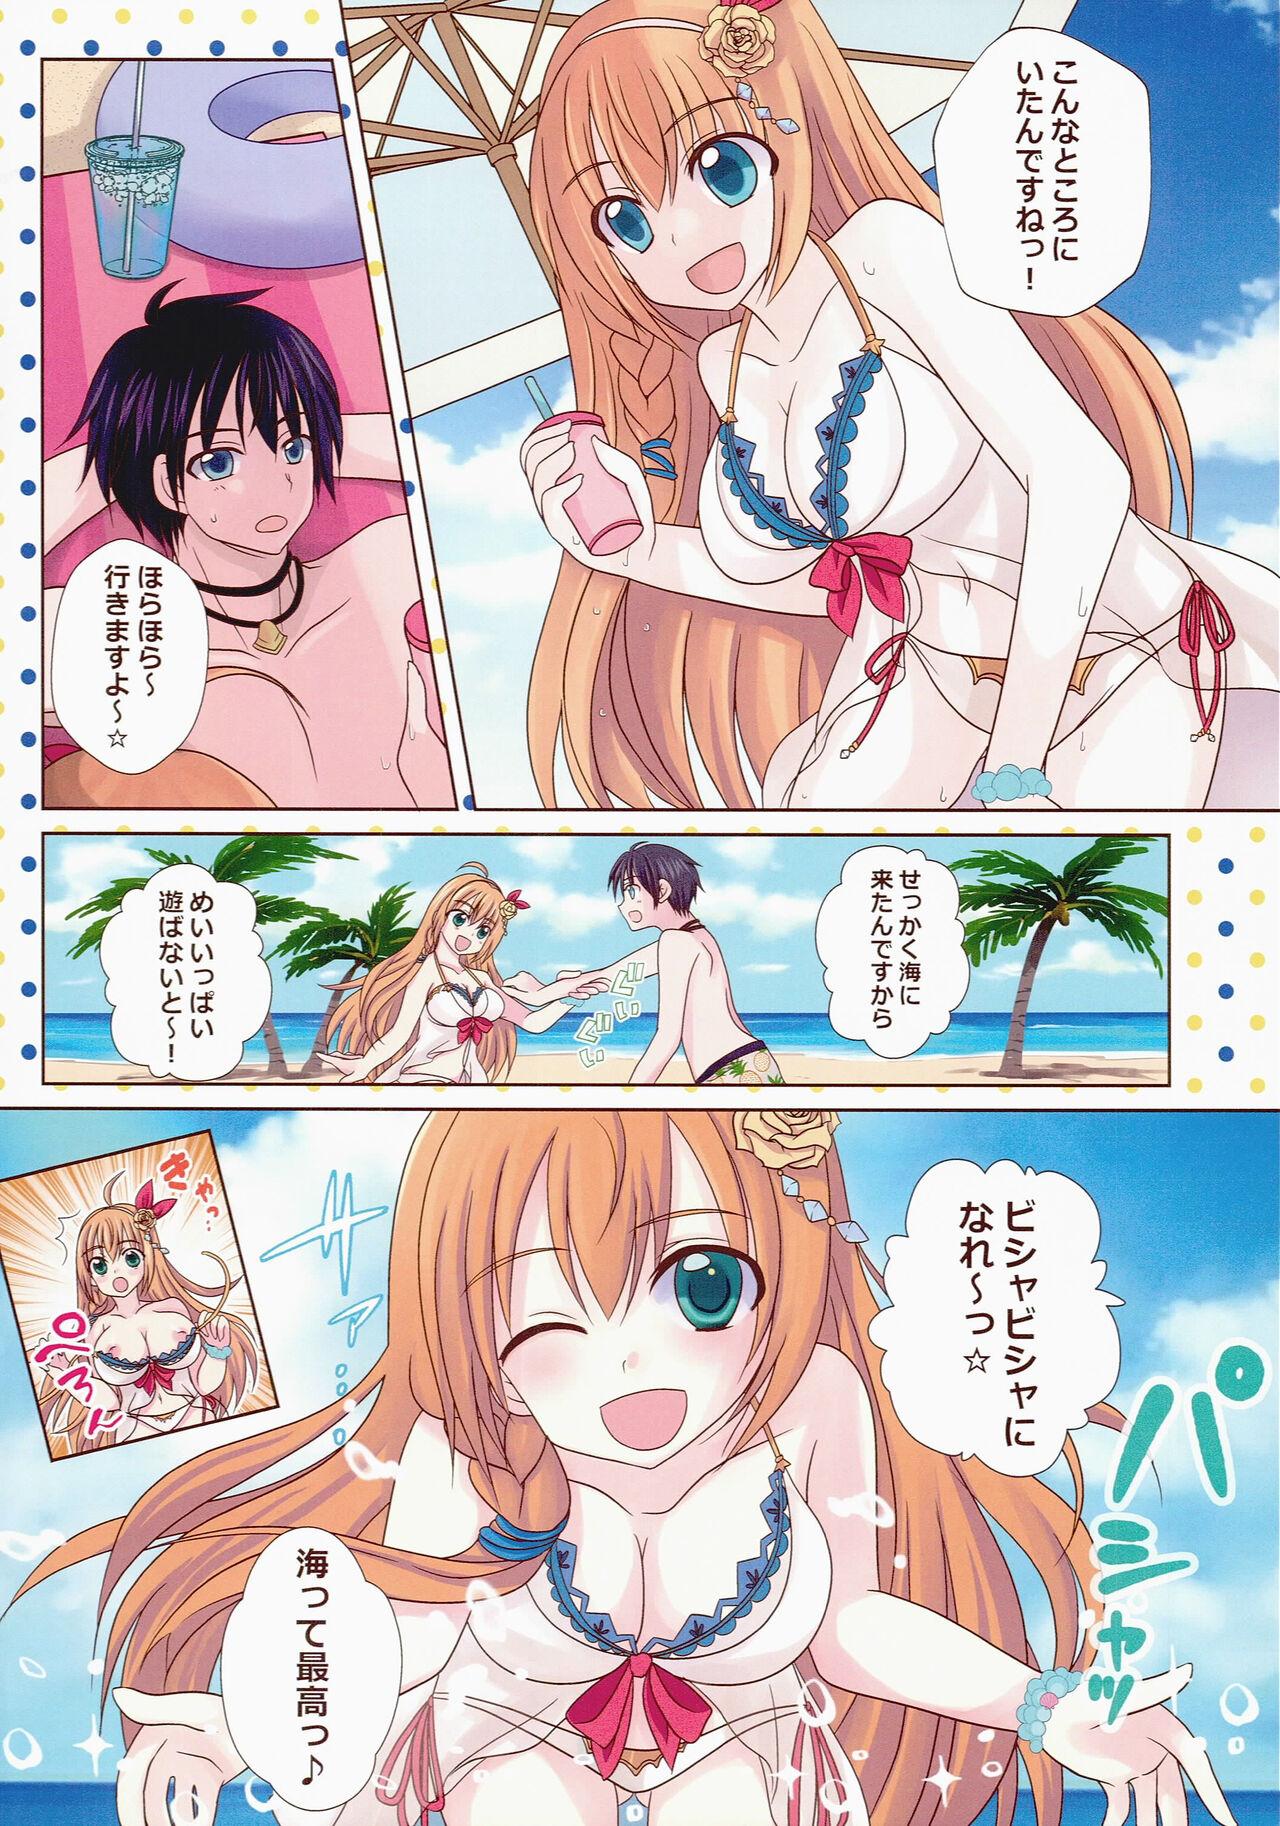 Publico Princess Summer Vacation - Princess connect Work - Page 5